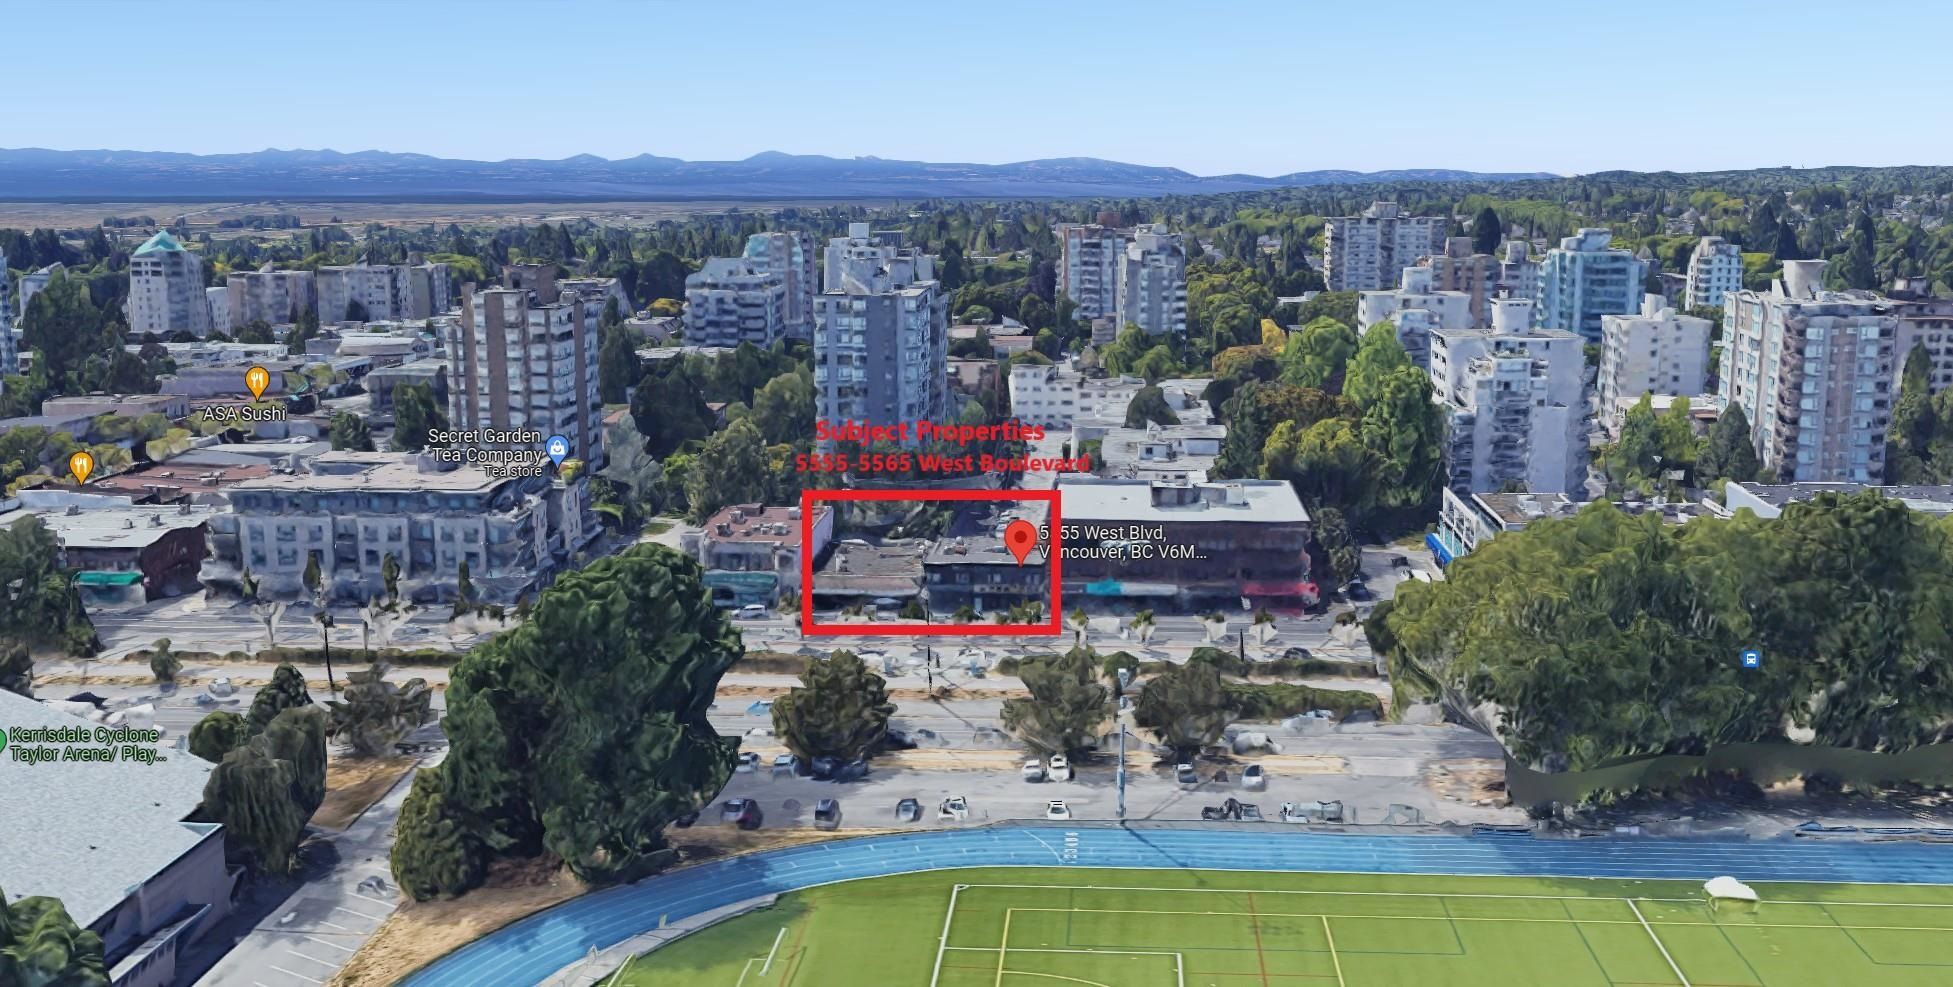 Main Photo: 5555 WEST BOULEVARD in Vancouver: Kerrisdale Land Commercial for sale (Vancouver West)  : MLS®# C8042847